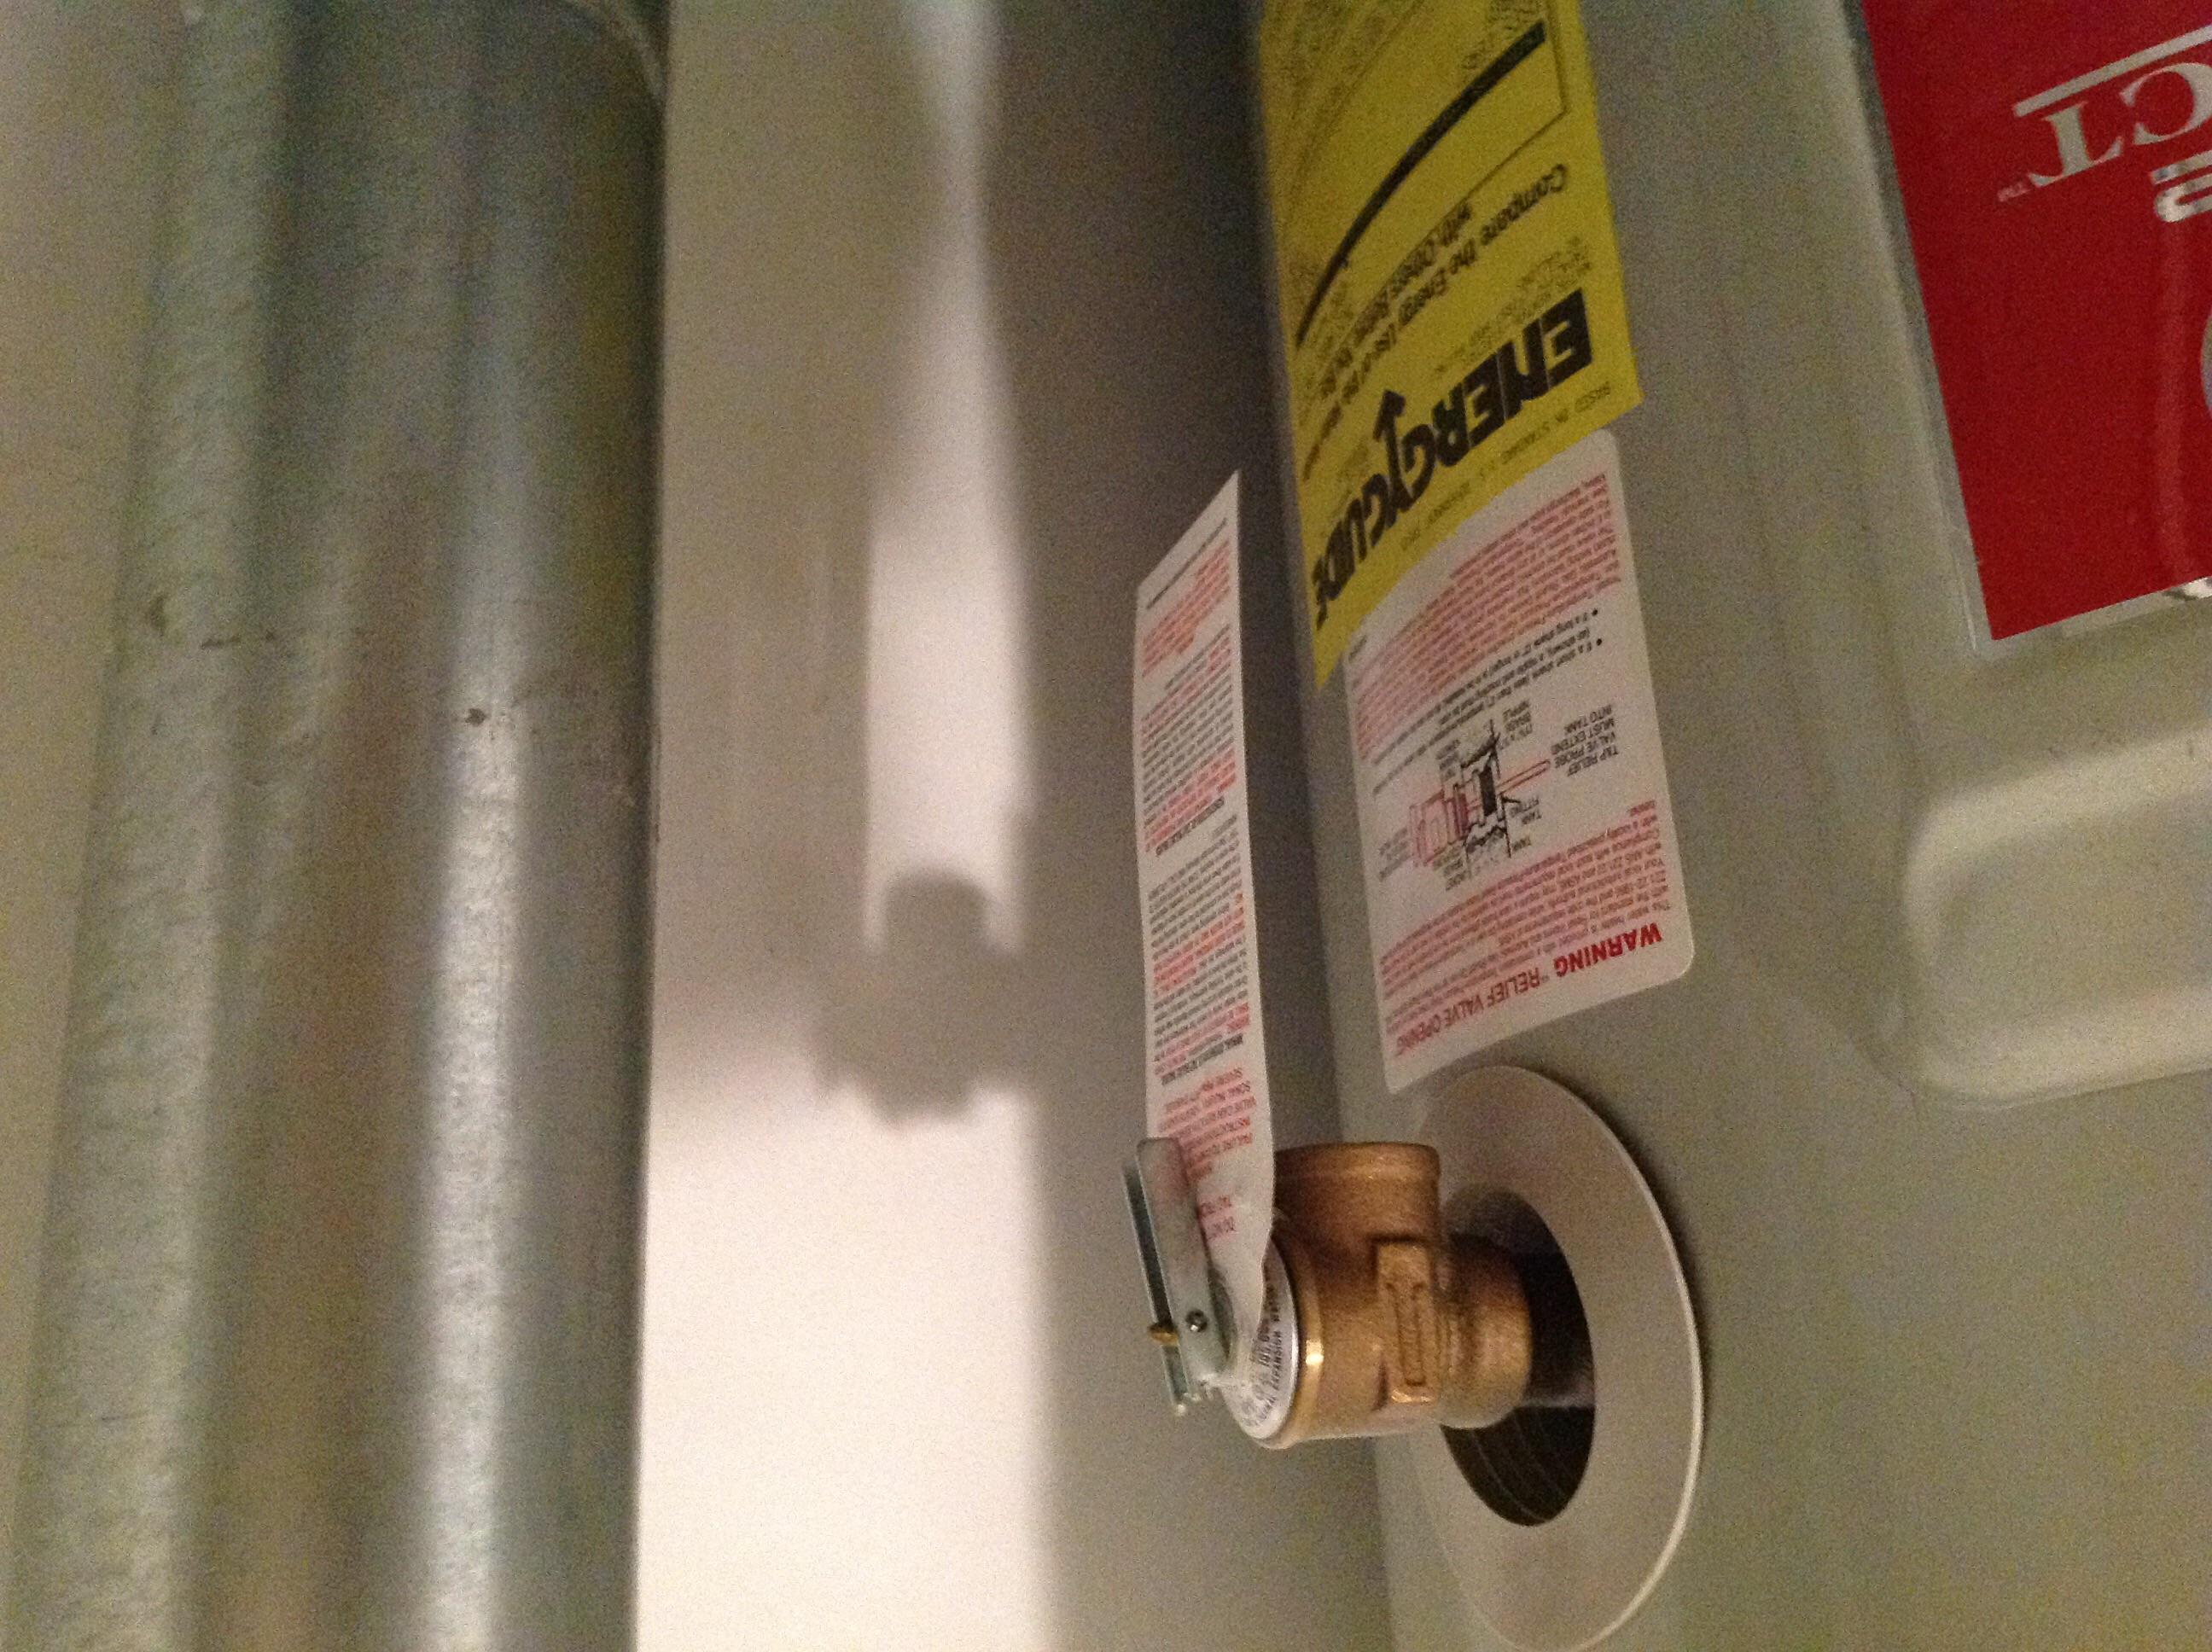 The Tpr valve on this water heater did not have a discharge pipe directing any hot water to the drip pan or a drain, found by Bumgardner inspection services in miamisburg Ohio 